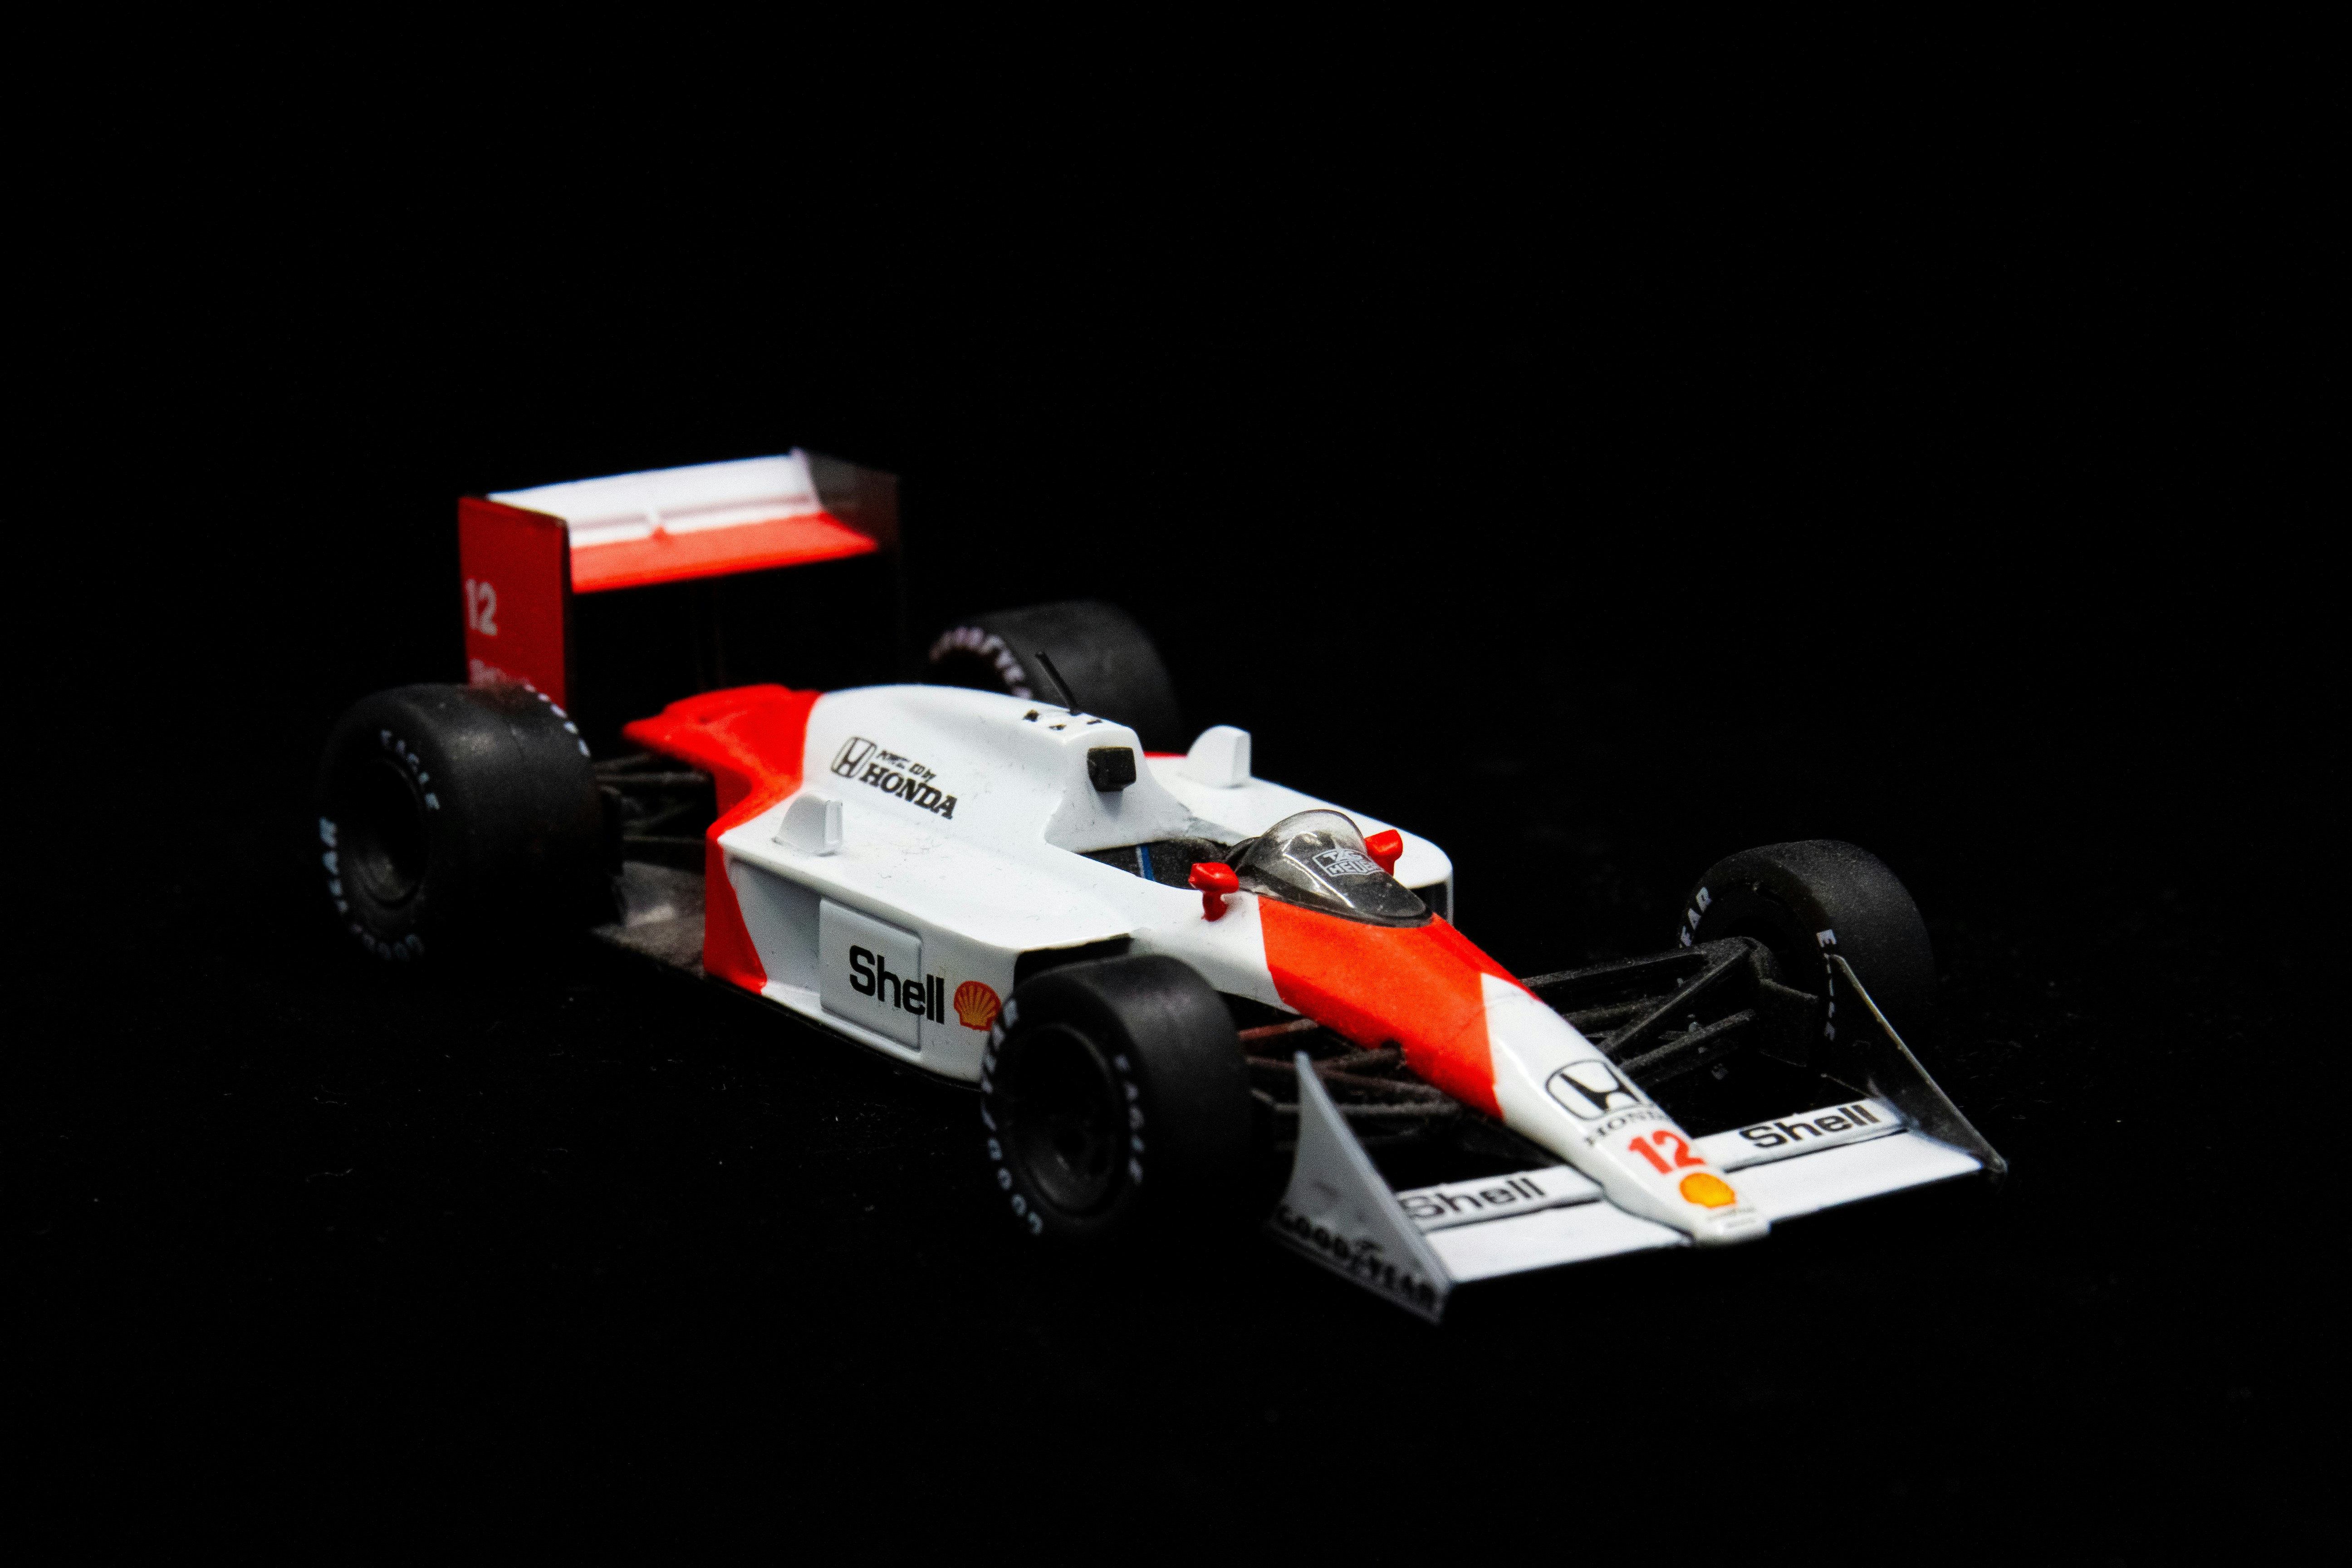 Red and white mclaren mp4/4 - - - Hey, if you like my photos and want to see more, visit my webpage myrtorp.com - Paypal Support: paypal.me/pmyrtorp - follow me on Instagram: @myrstump - Contact me at Philip@myrtorp.net